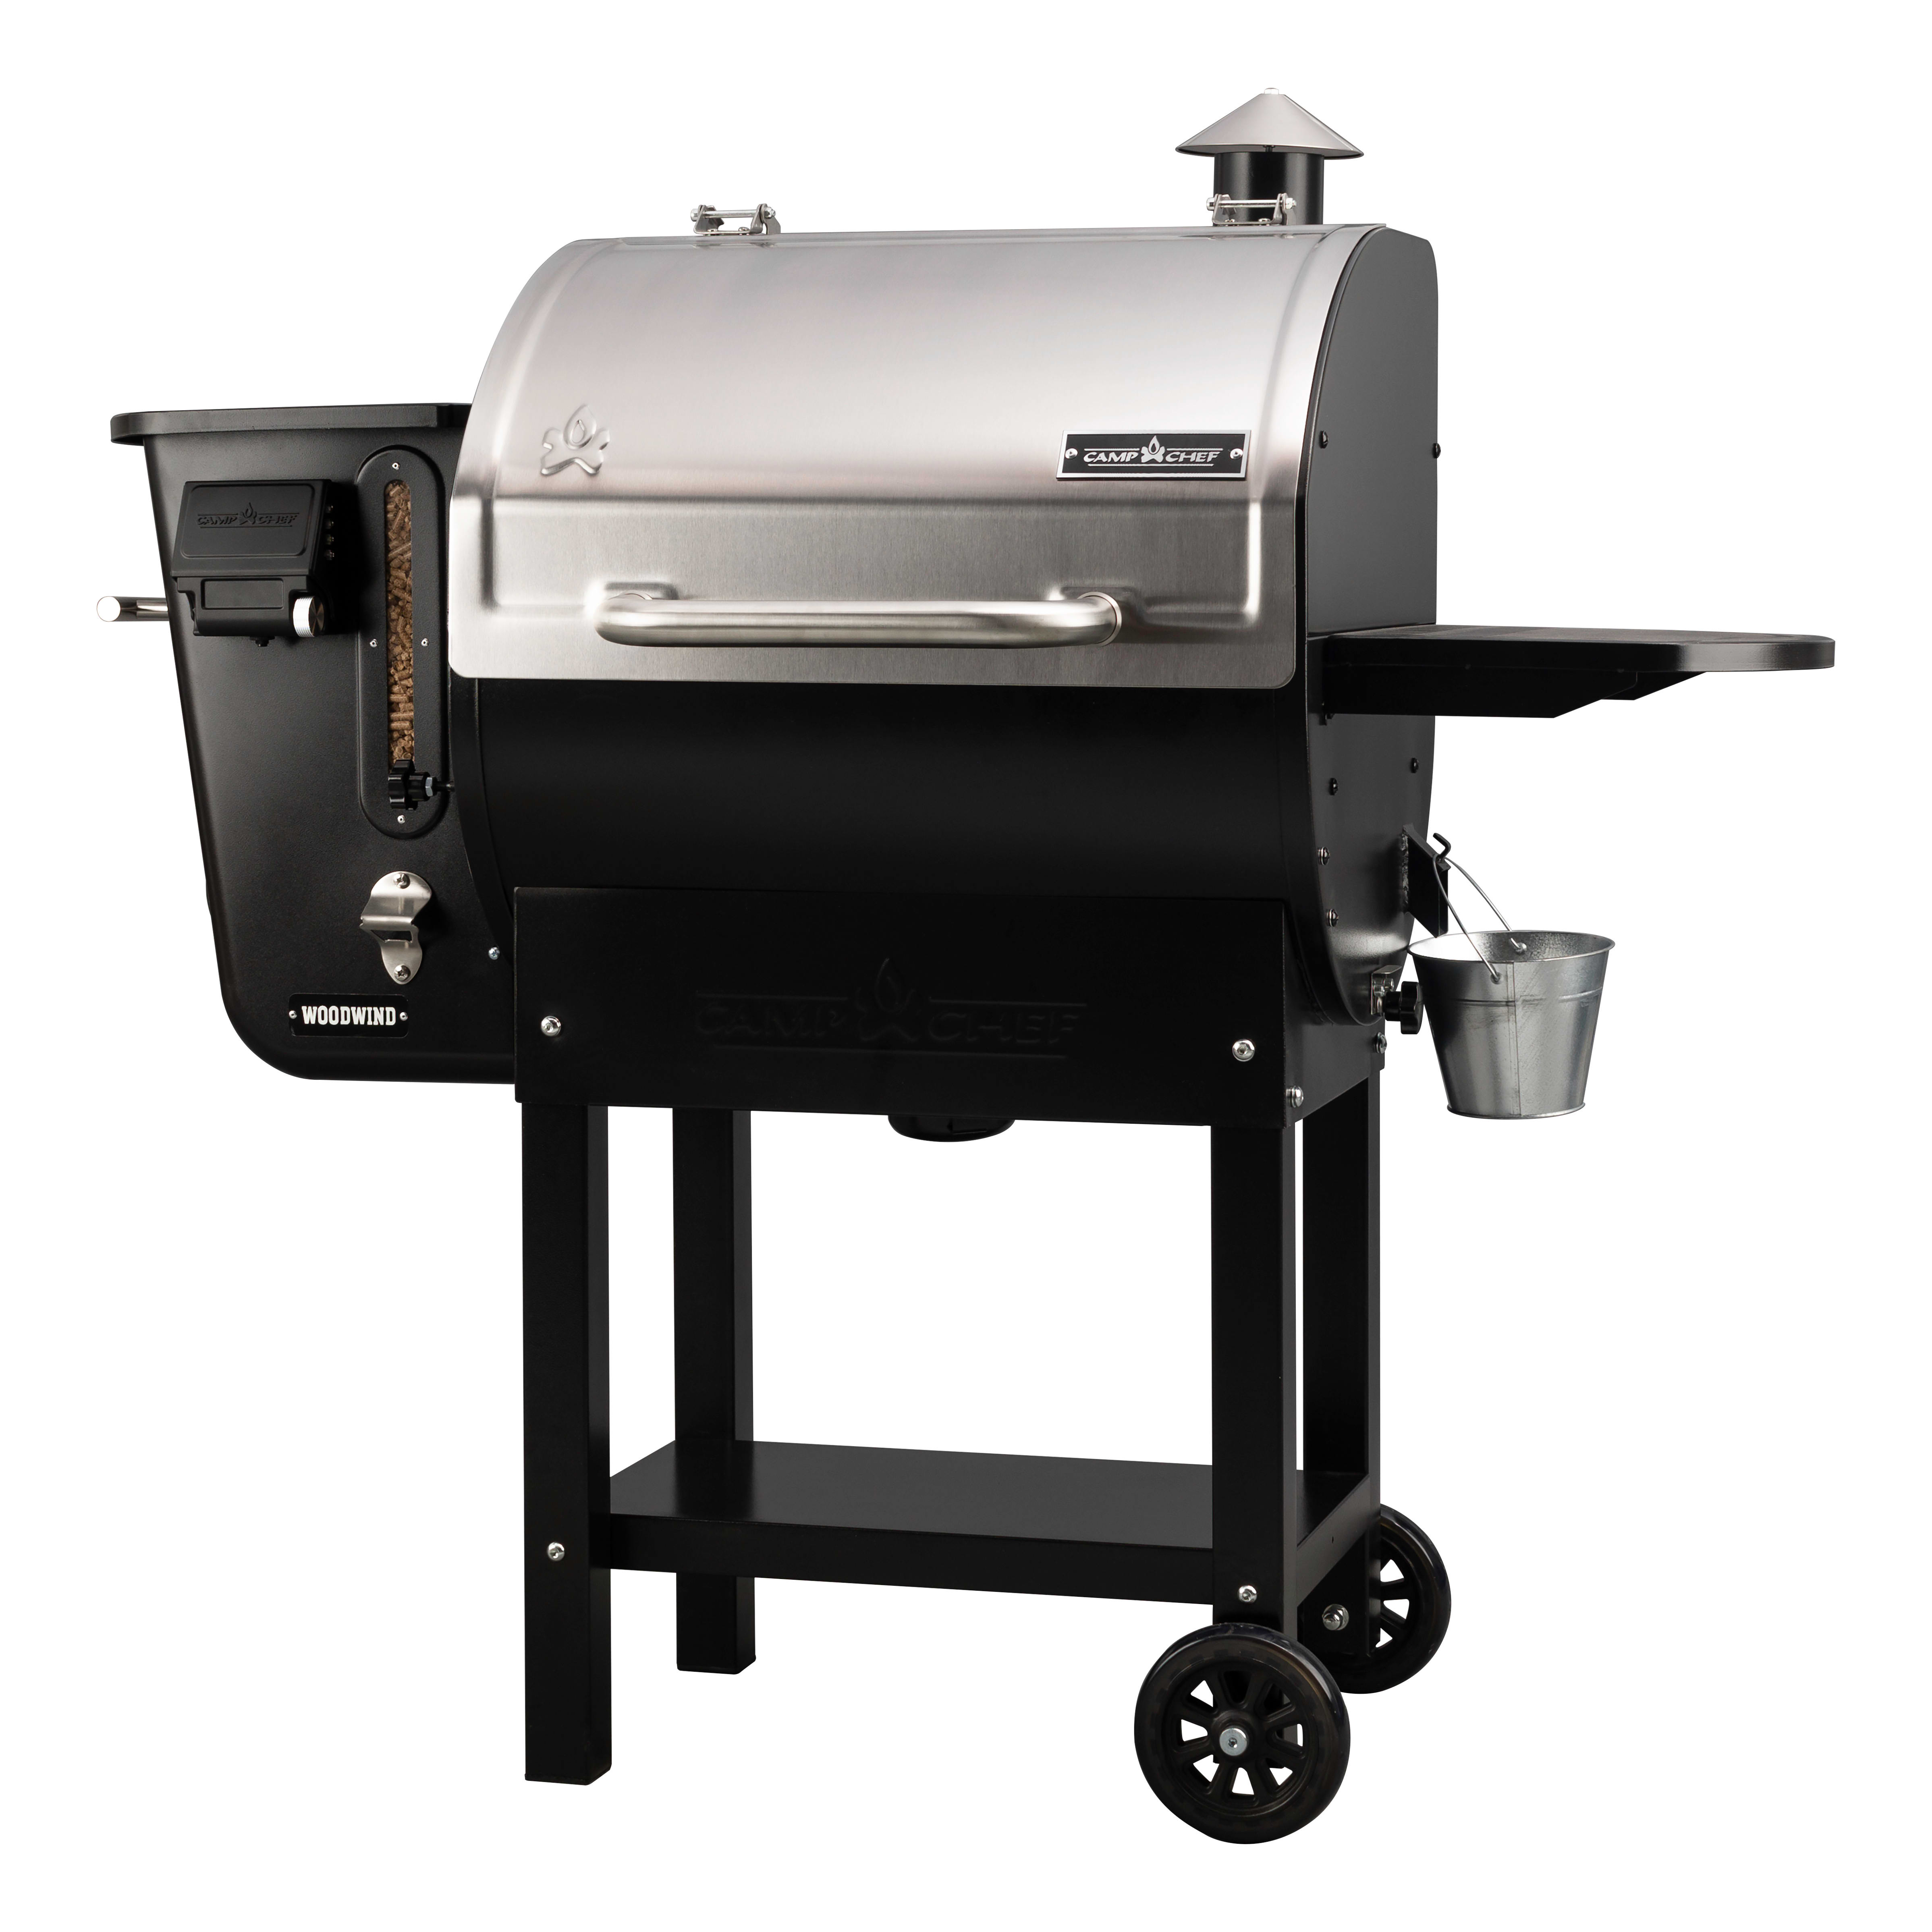 Camp Chef® Woodwind 24" Pellet Grill 